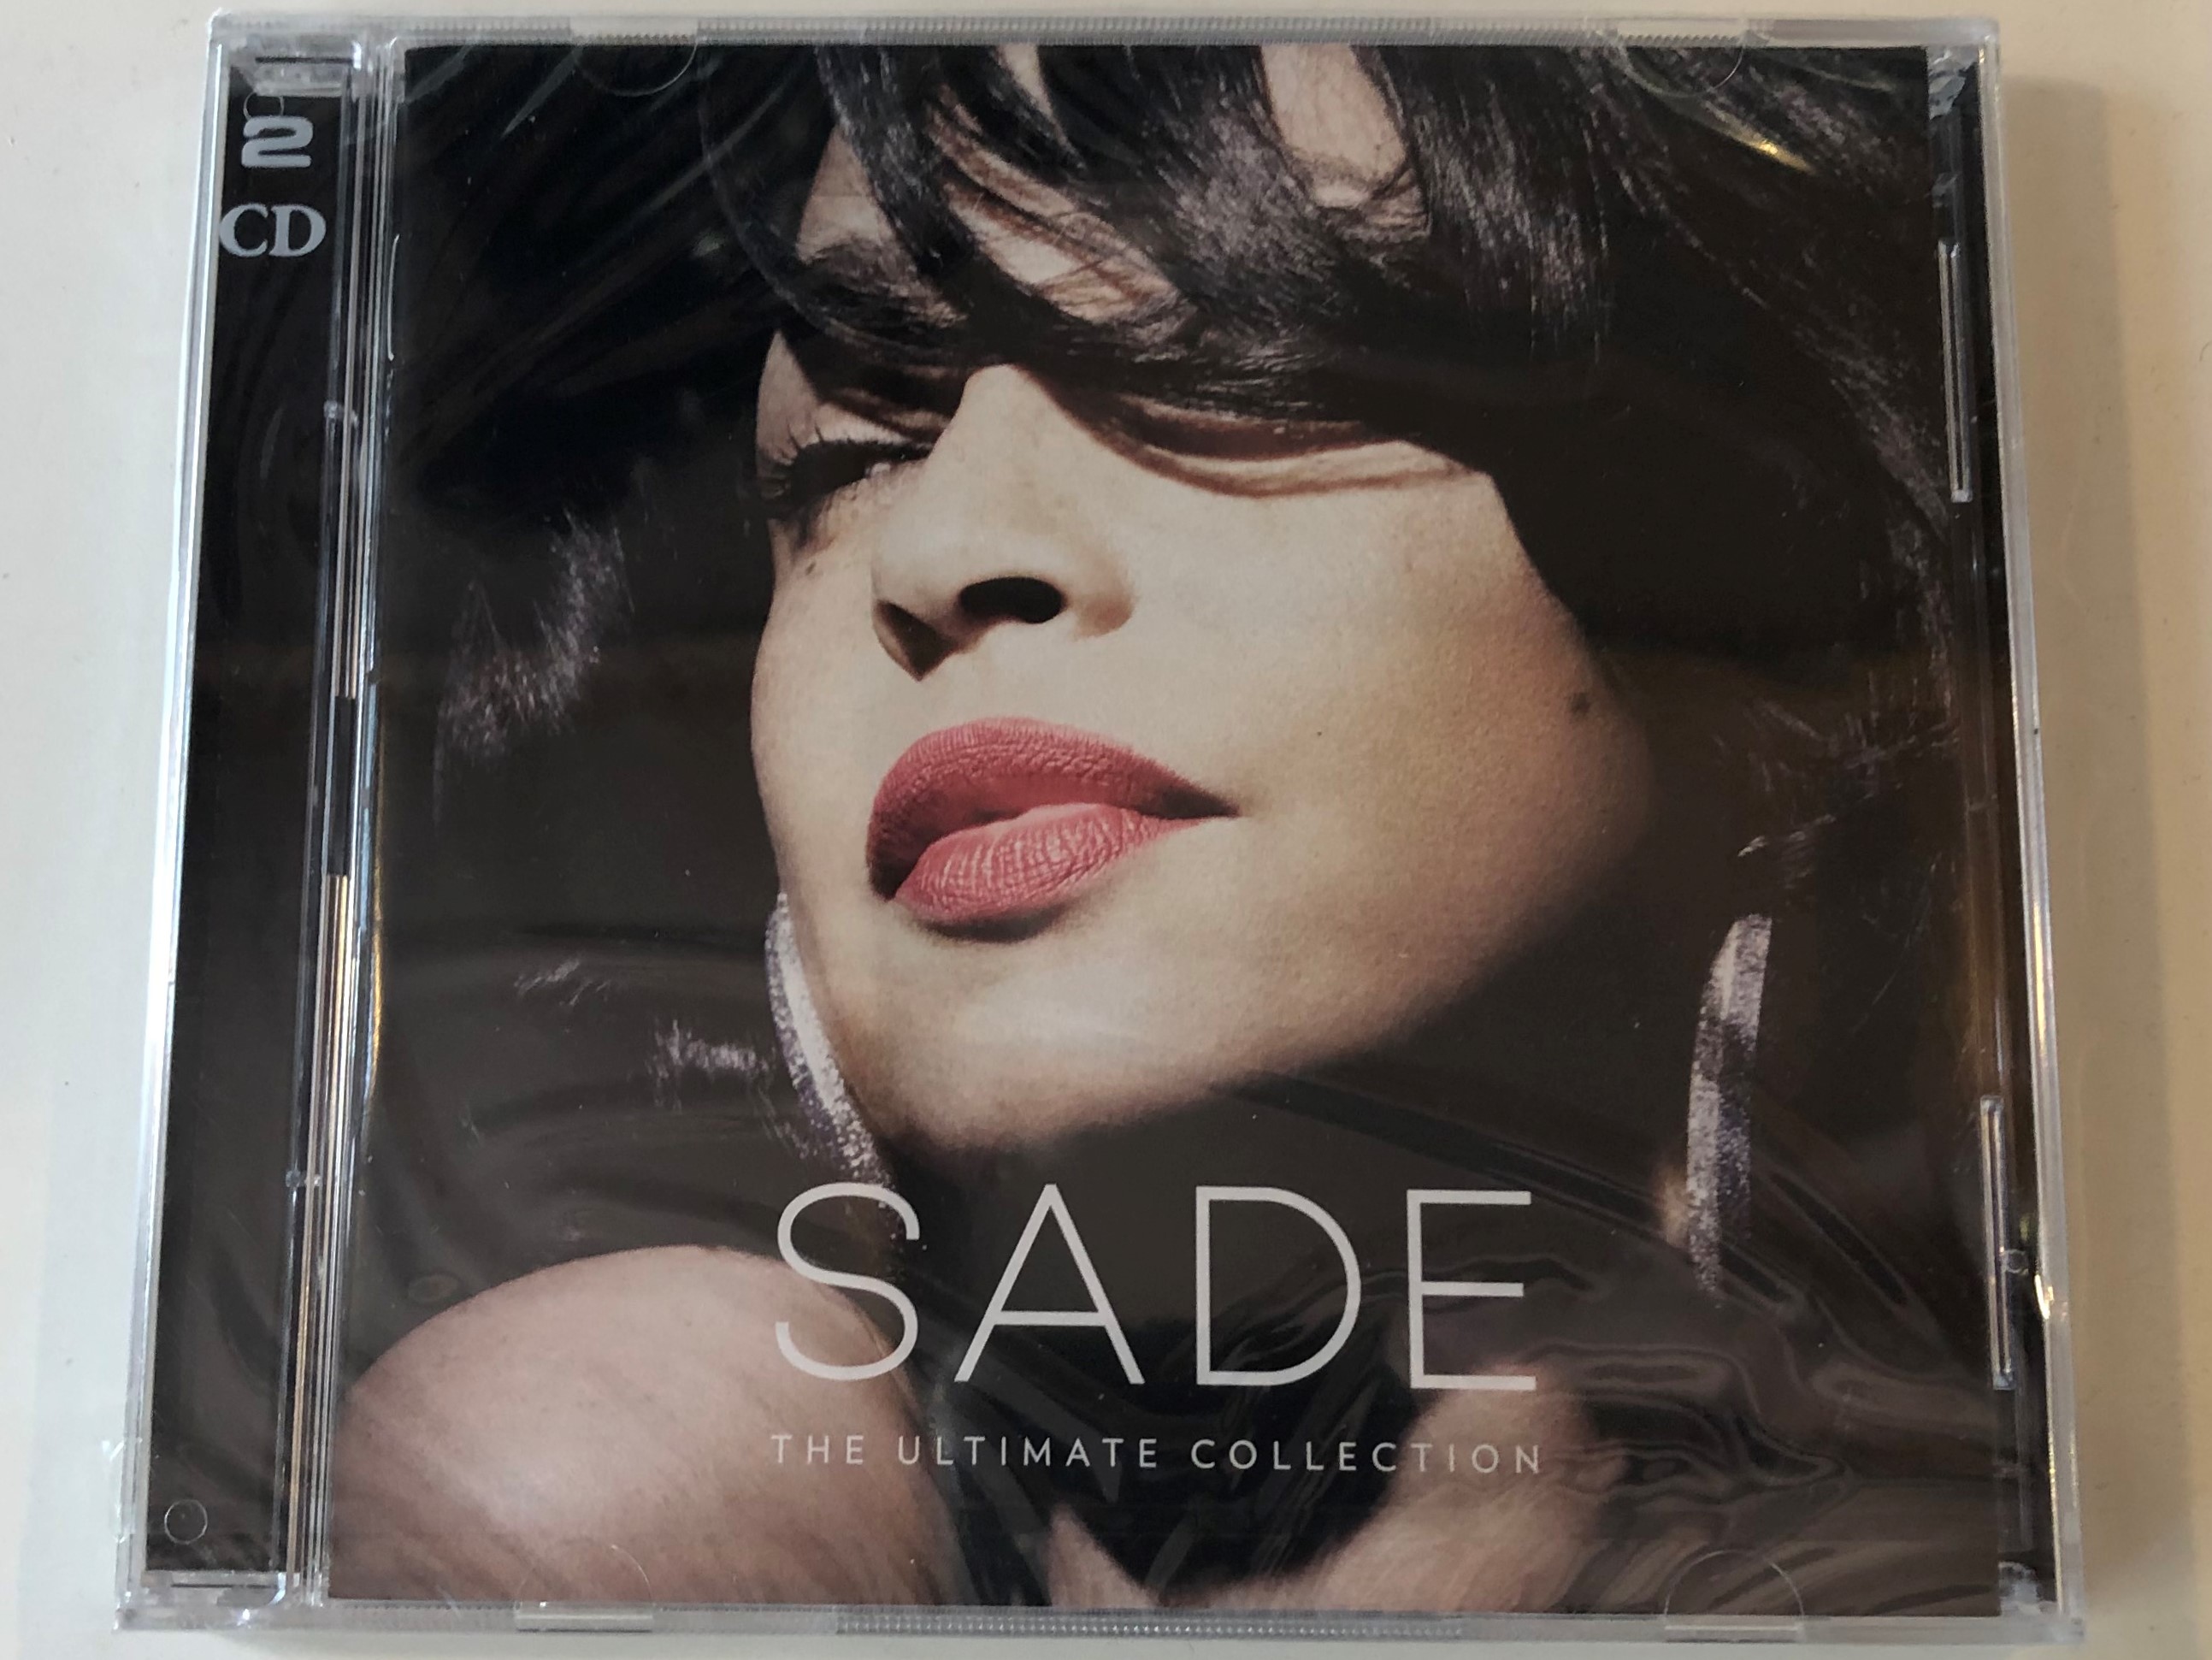 sade-the-ultimate-collection-sony-music-2x-audio-cd-2011-886978993823-1-.jpg